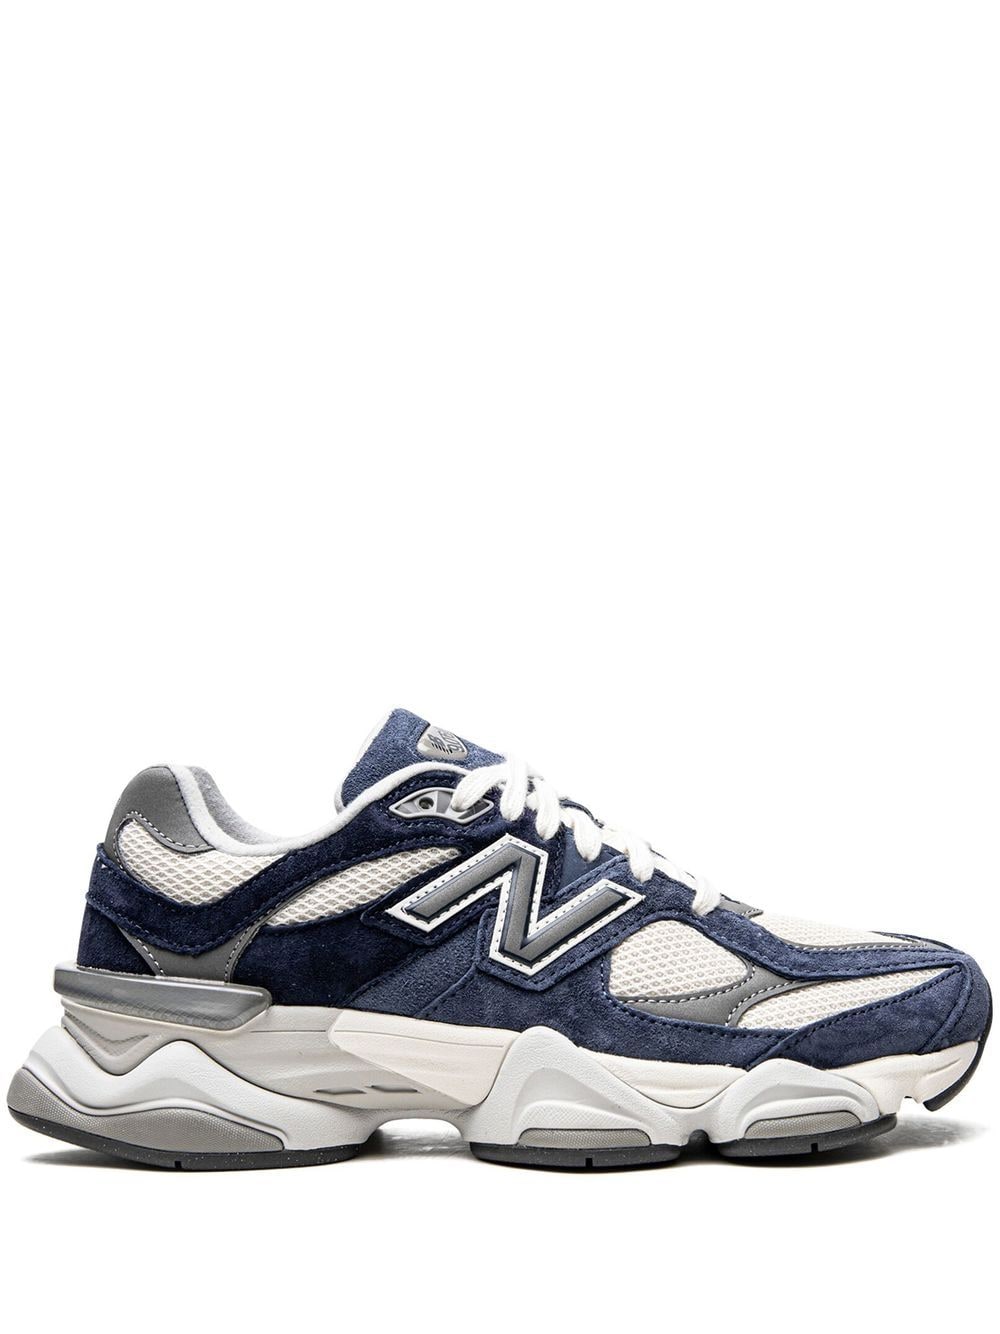 New Balance 9060 low-top sneakers - Blue